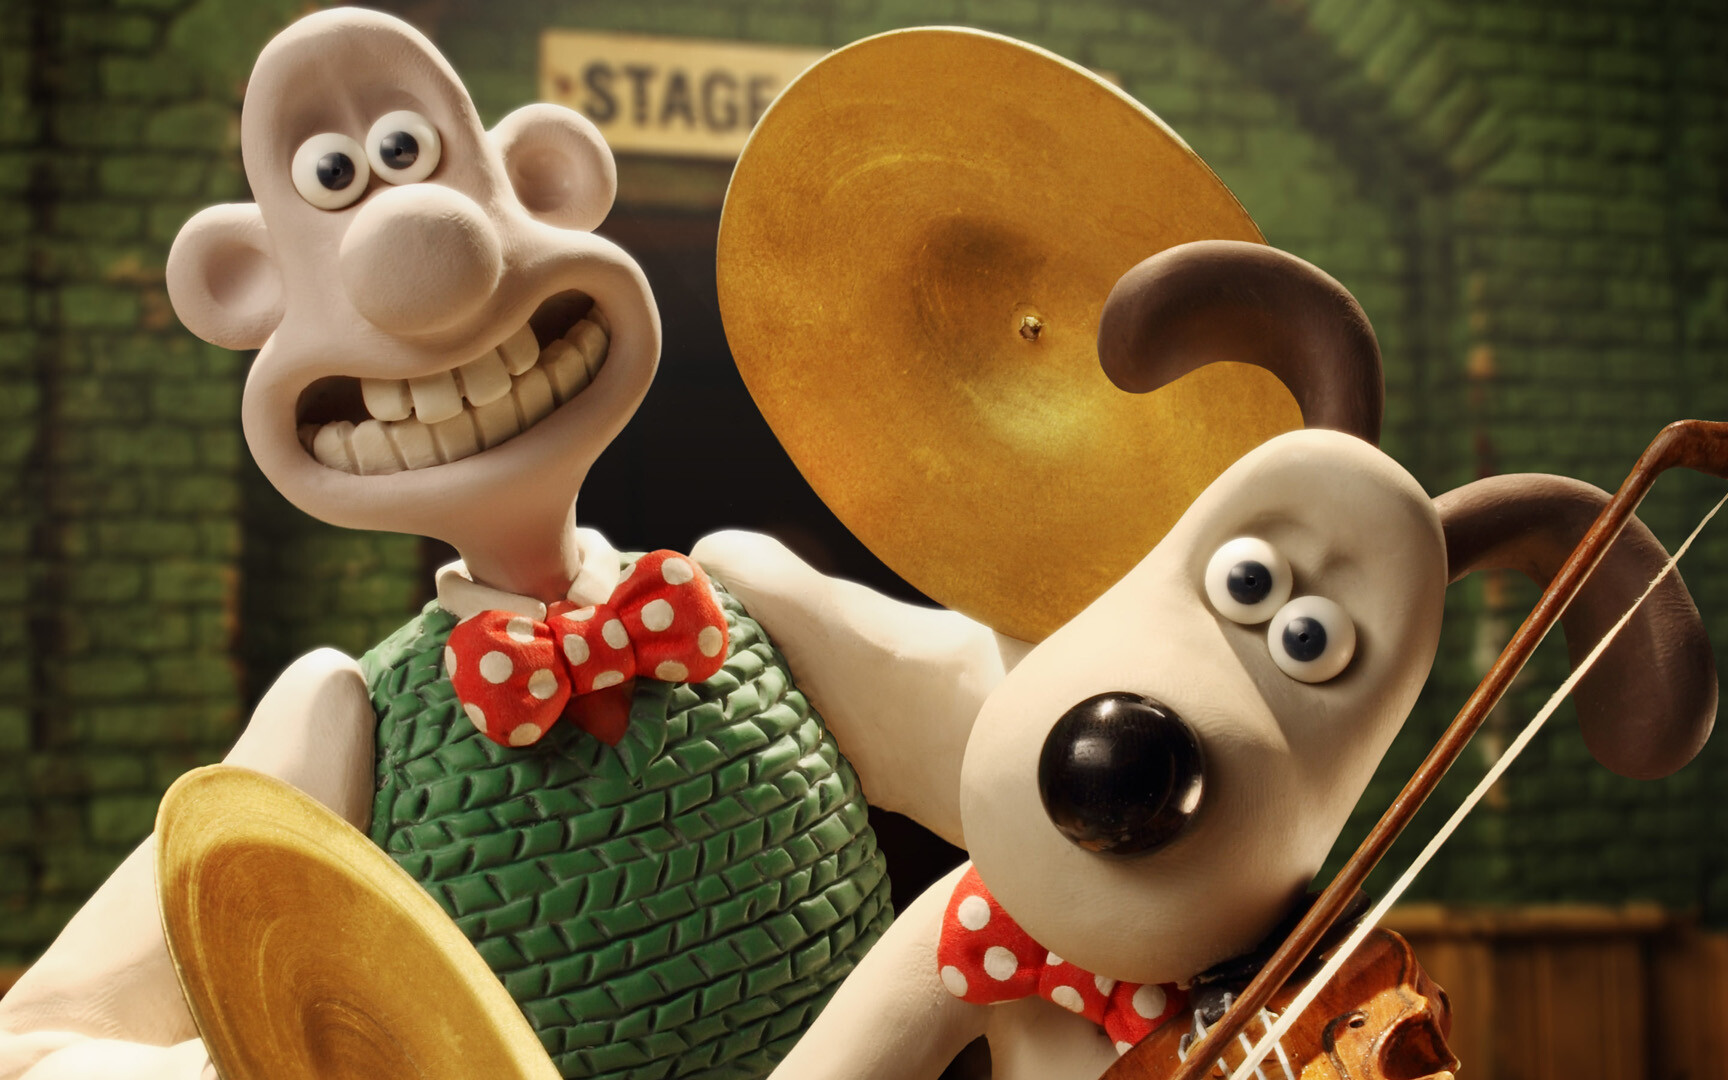 Wallace i Gromit